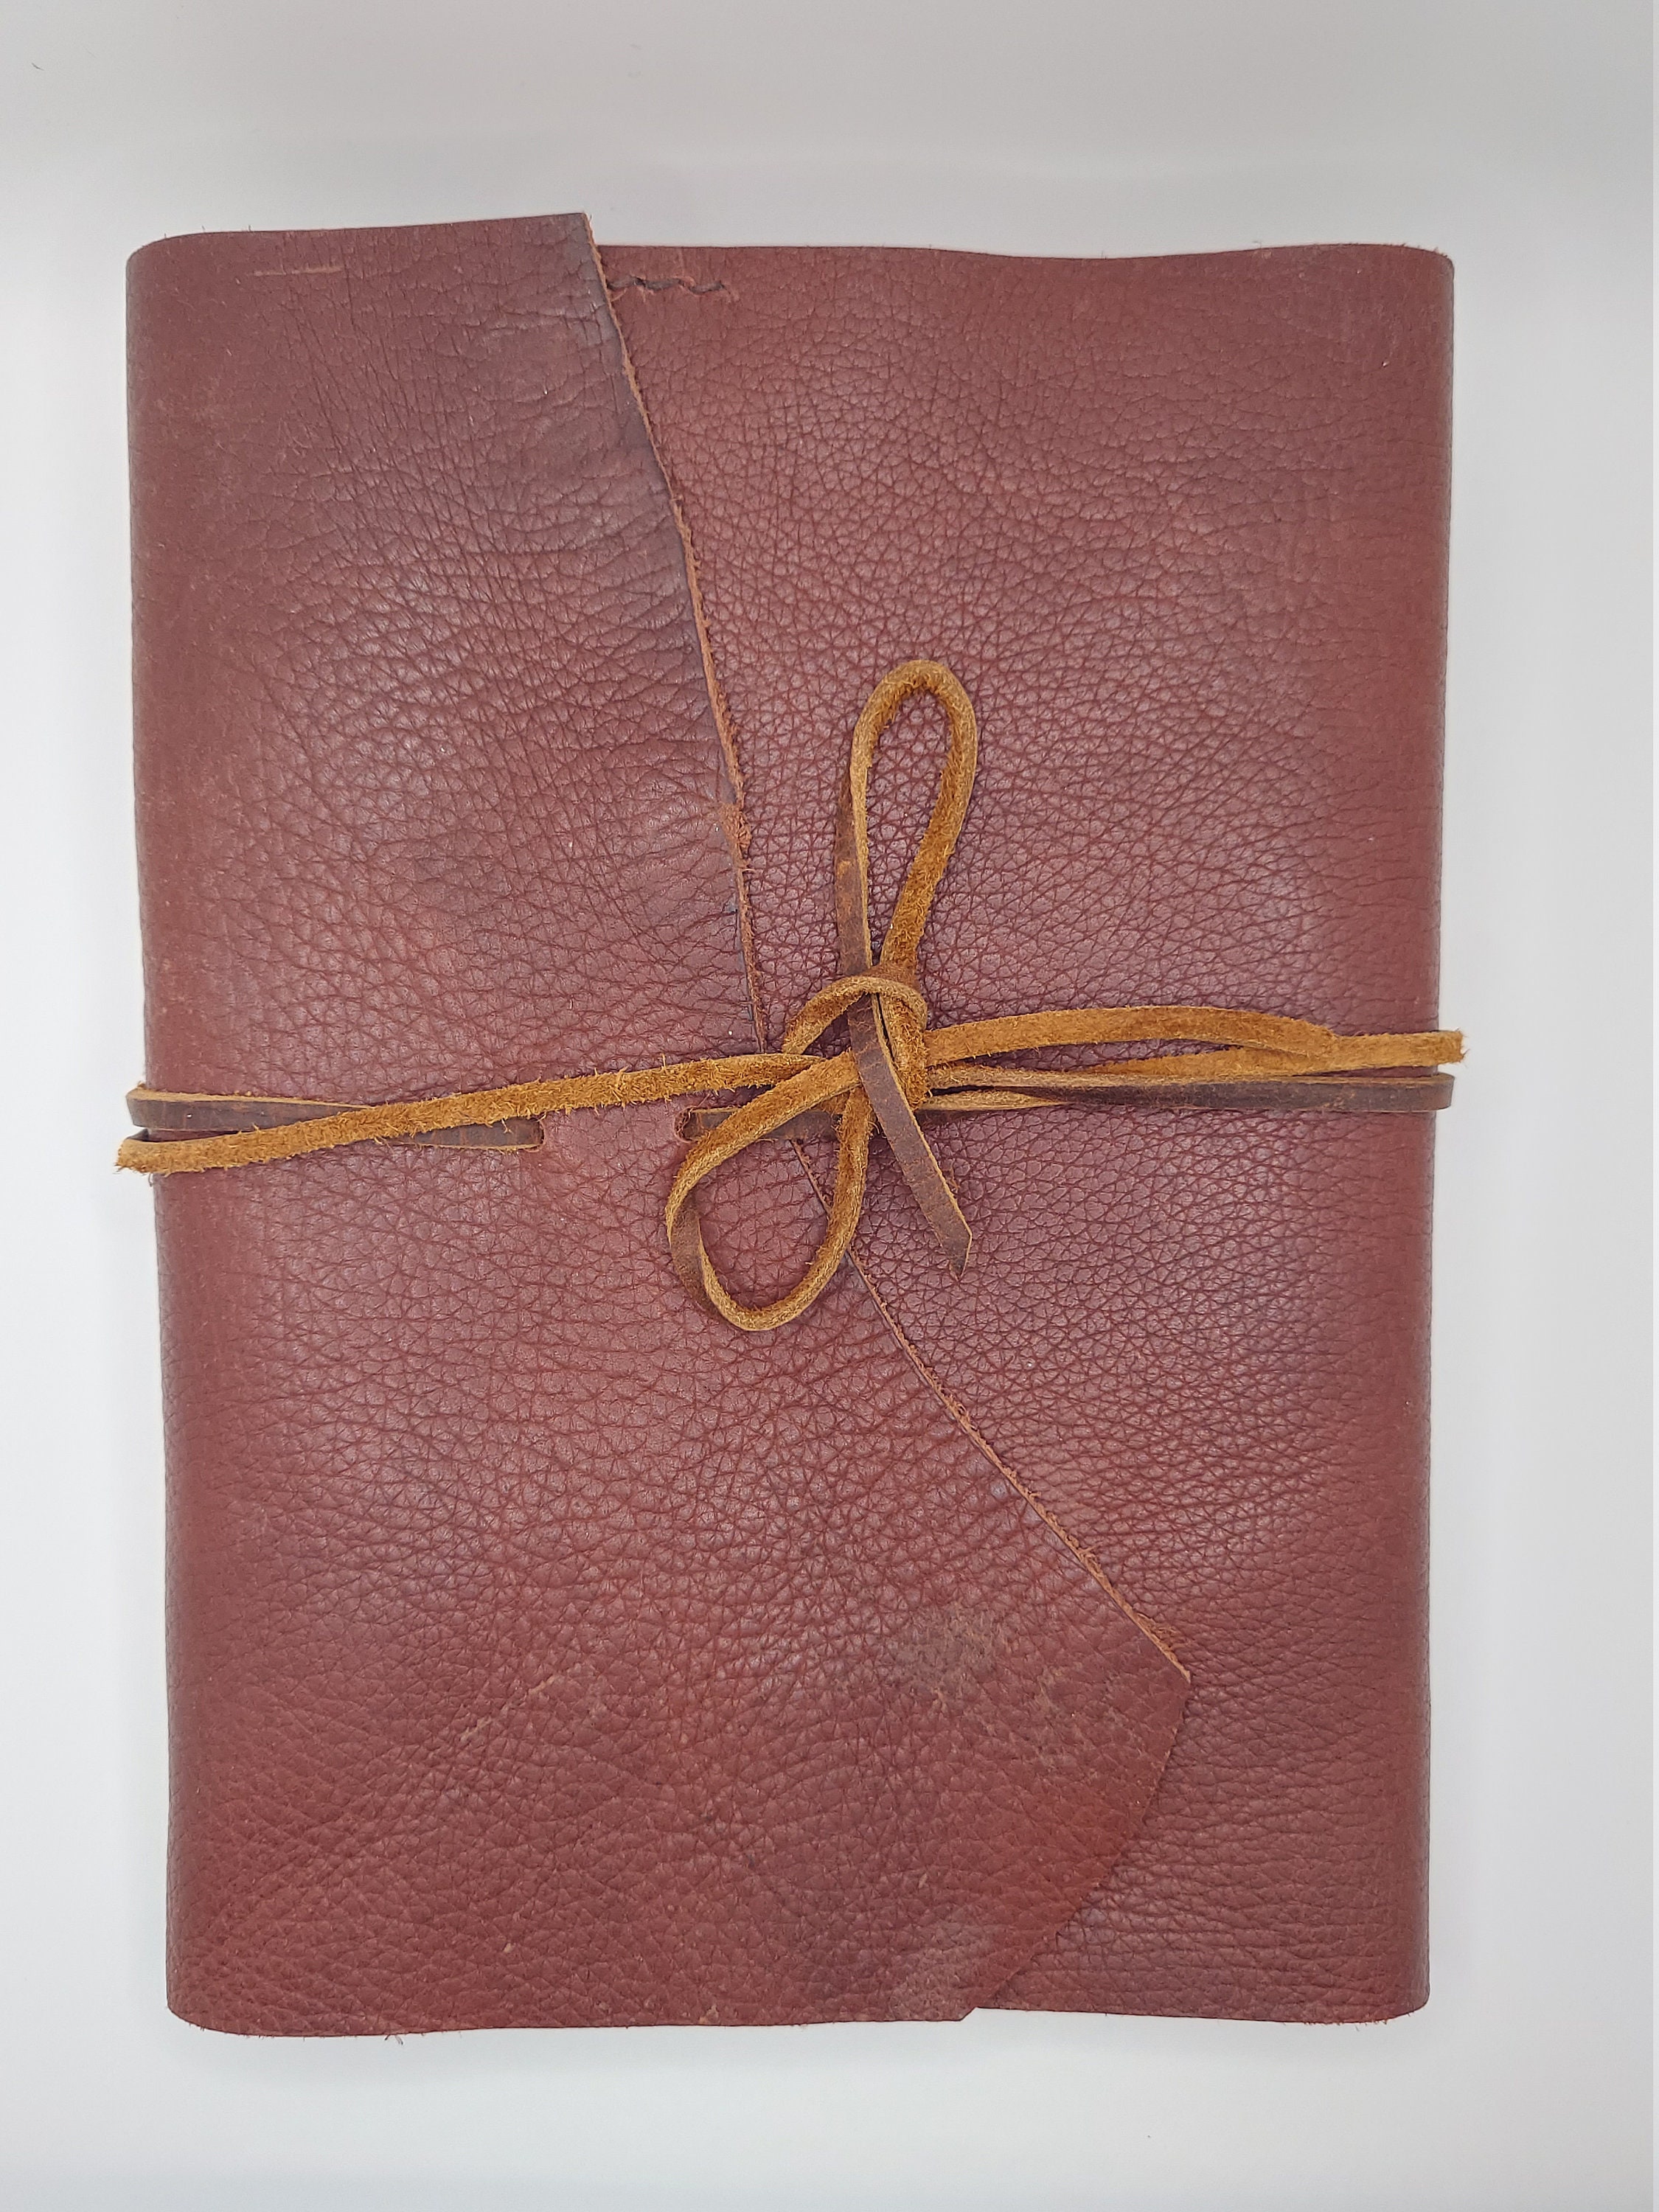 American Buffalo Bison Leather Journal Cover, USA Made